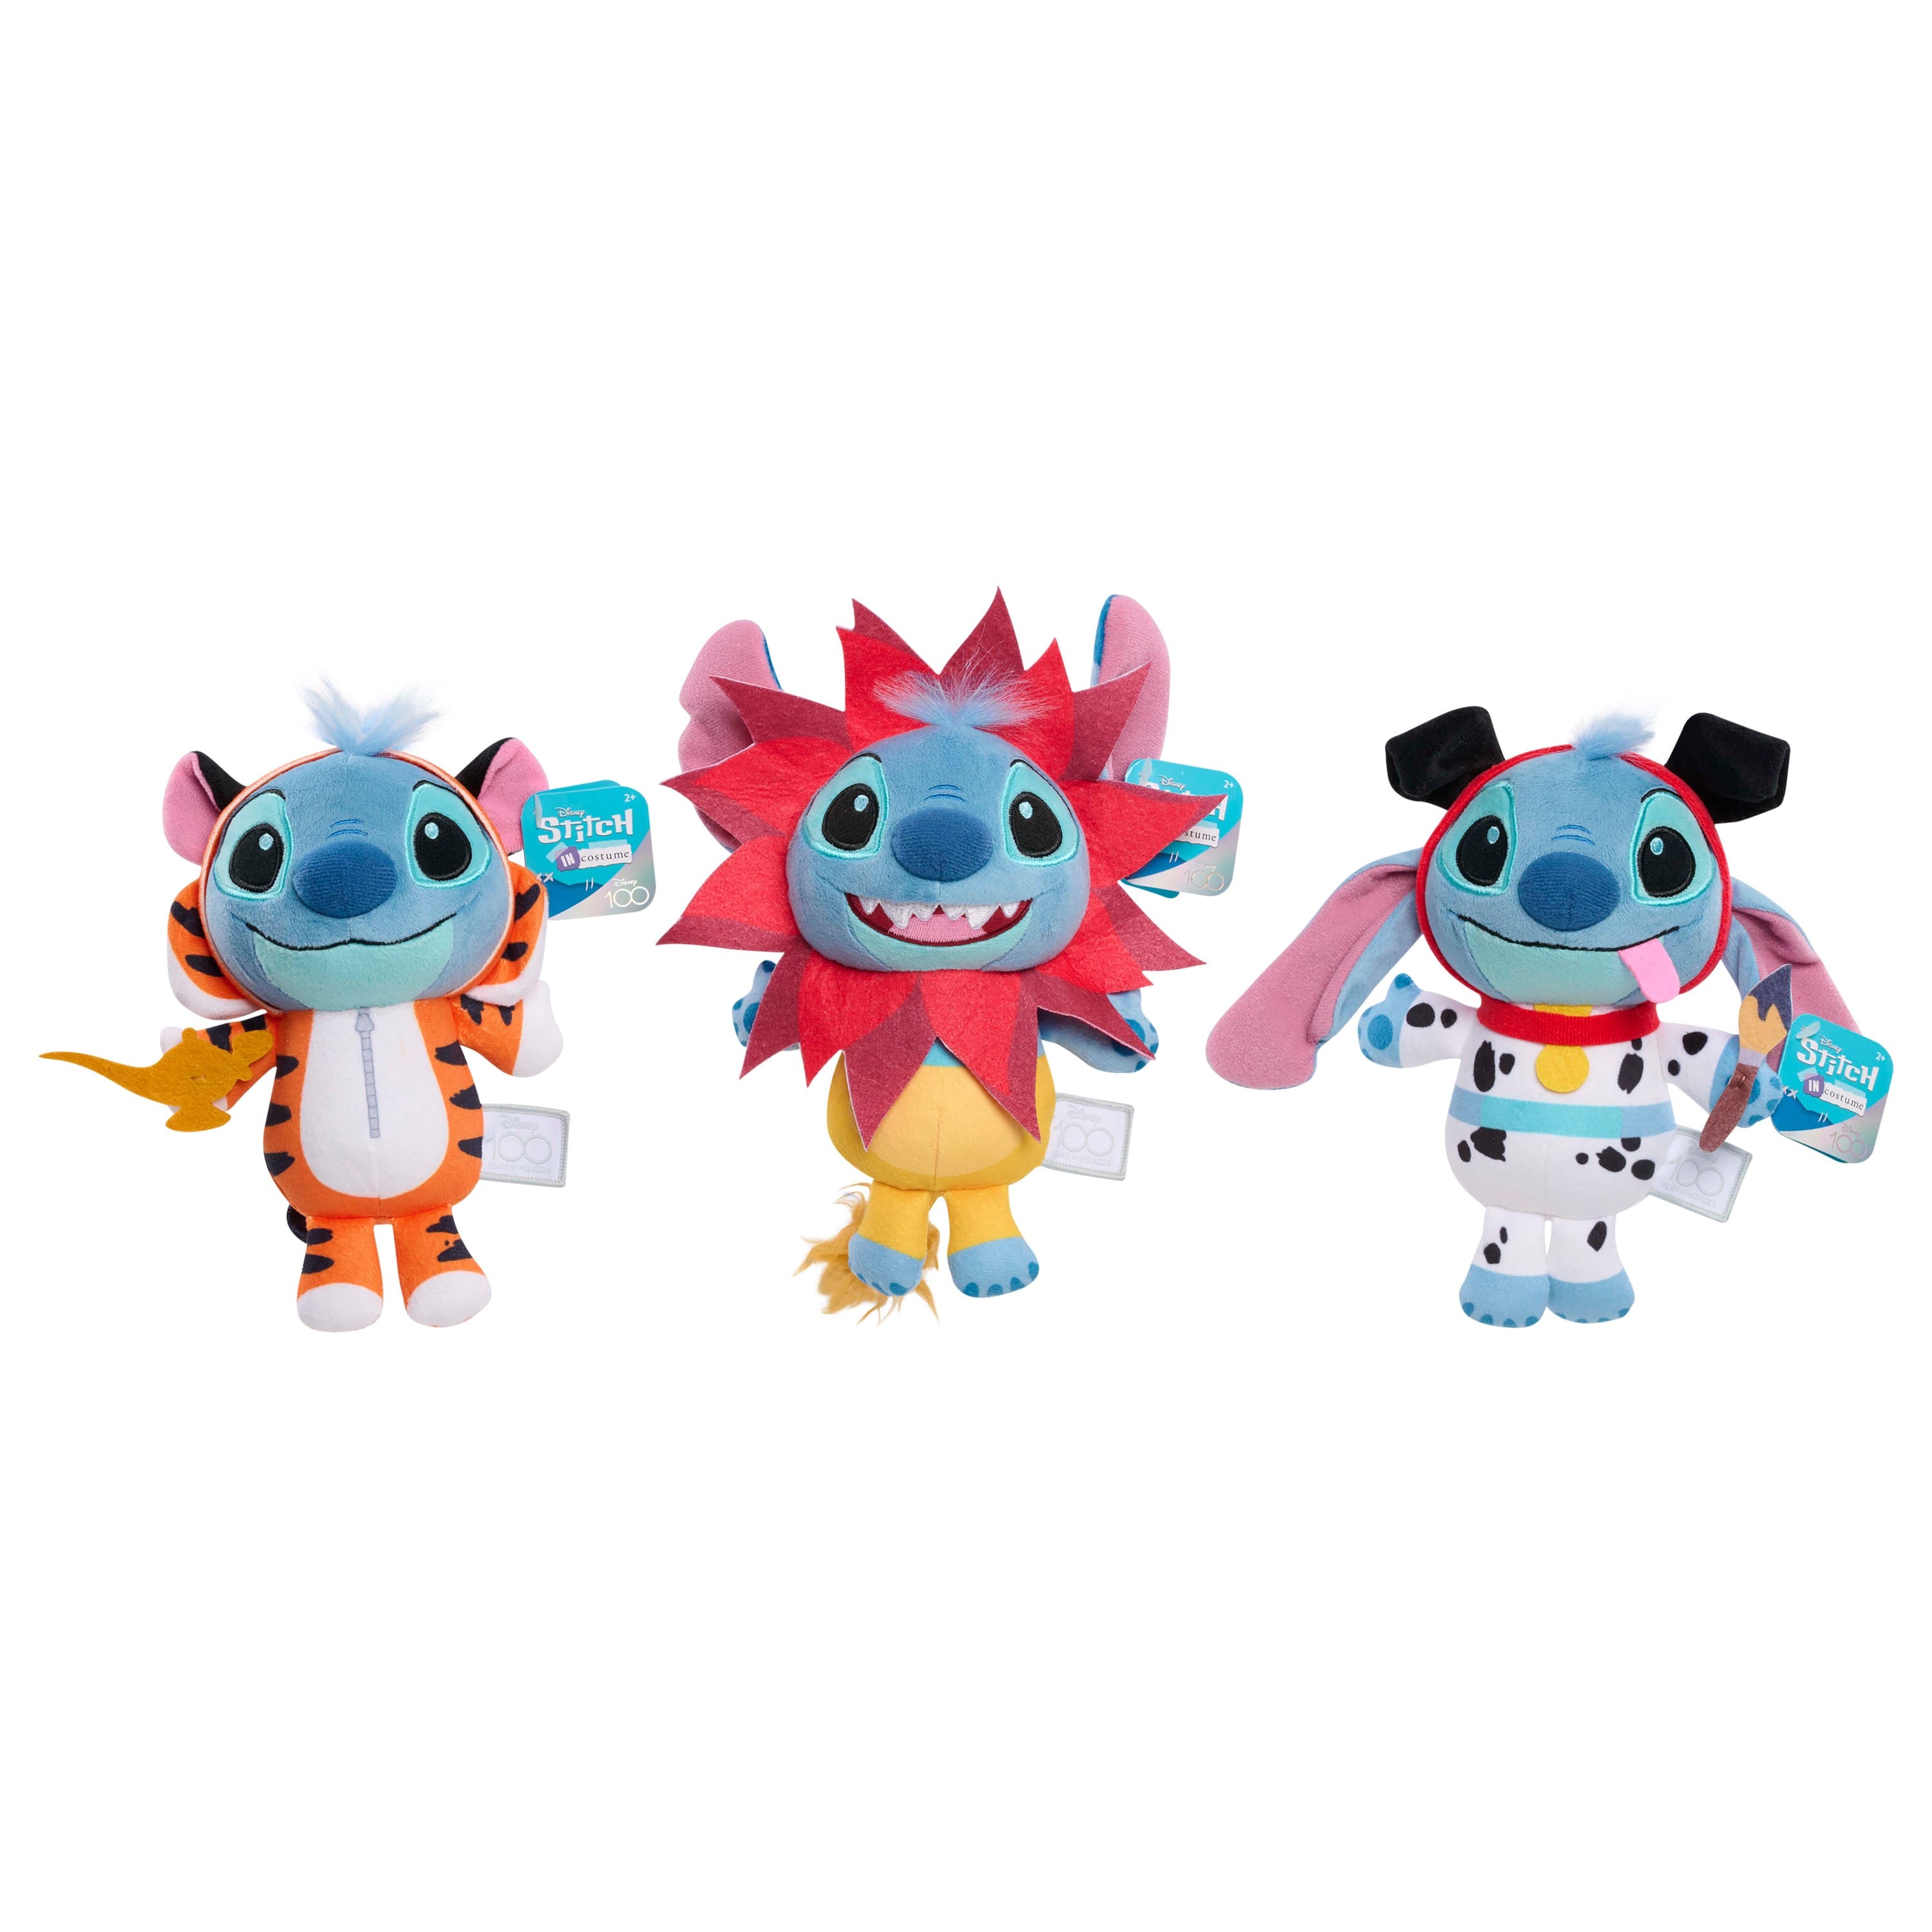 Stitch And Angel Characters 8 inches Tall 2 Piece Plush Toy Set 